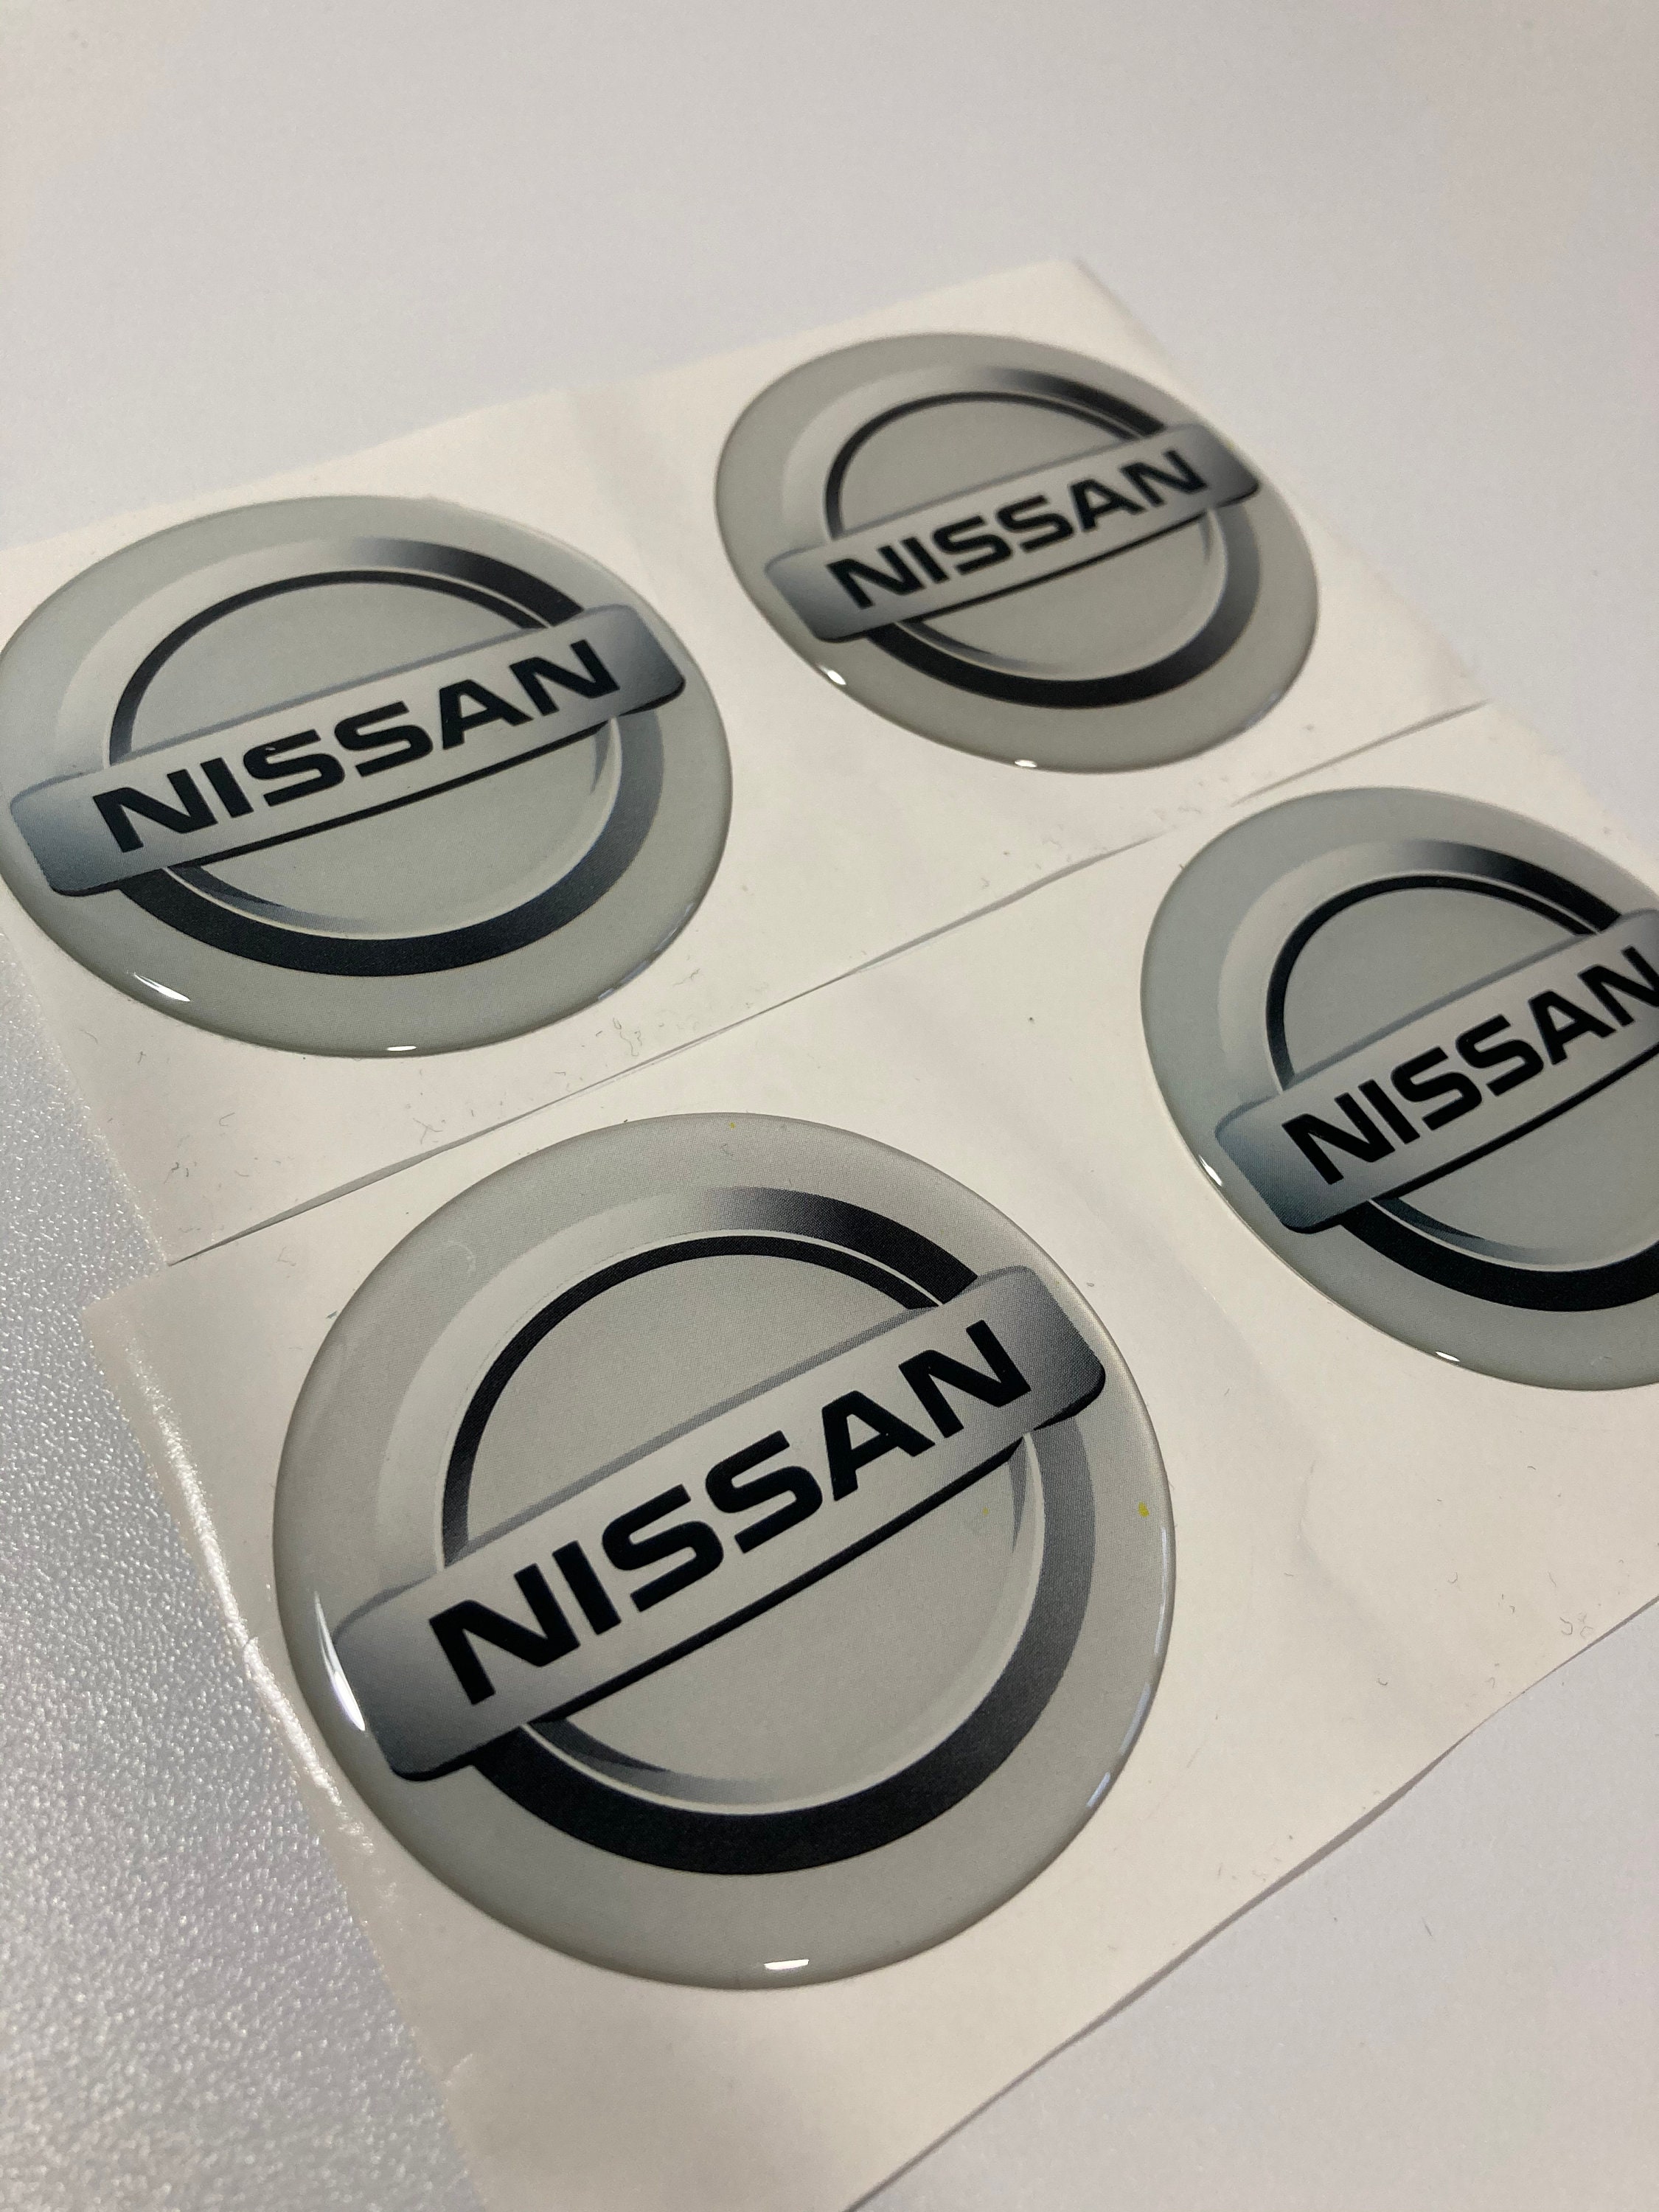 Nissan Altima Decal Etsy